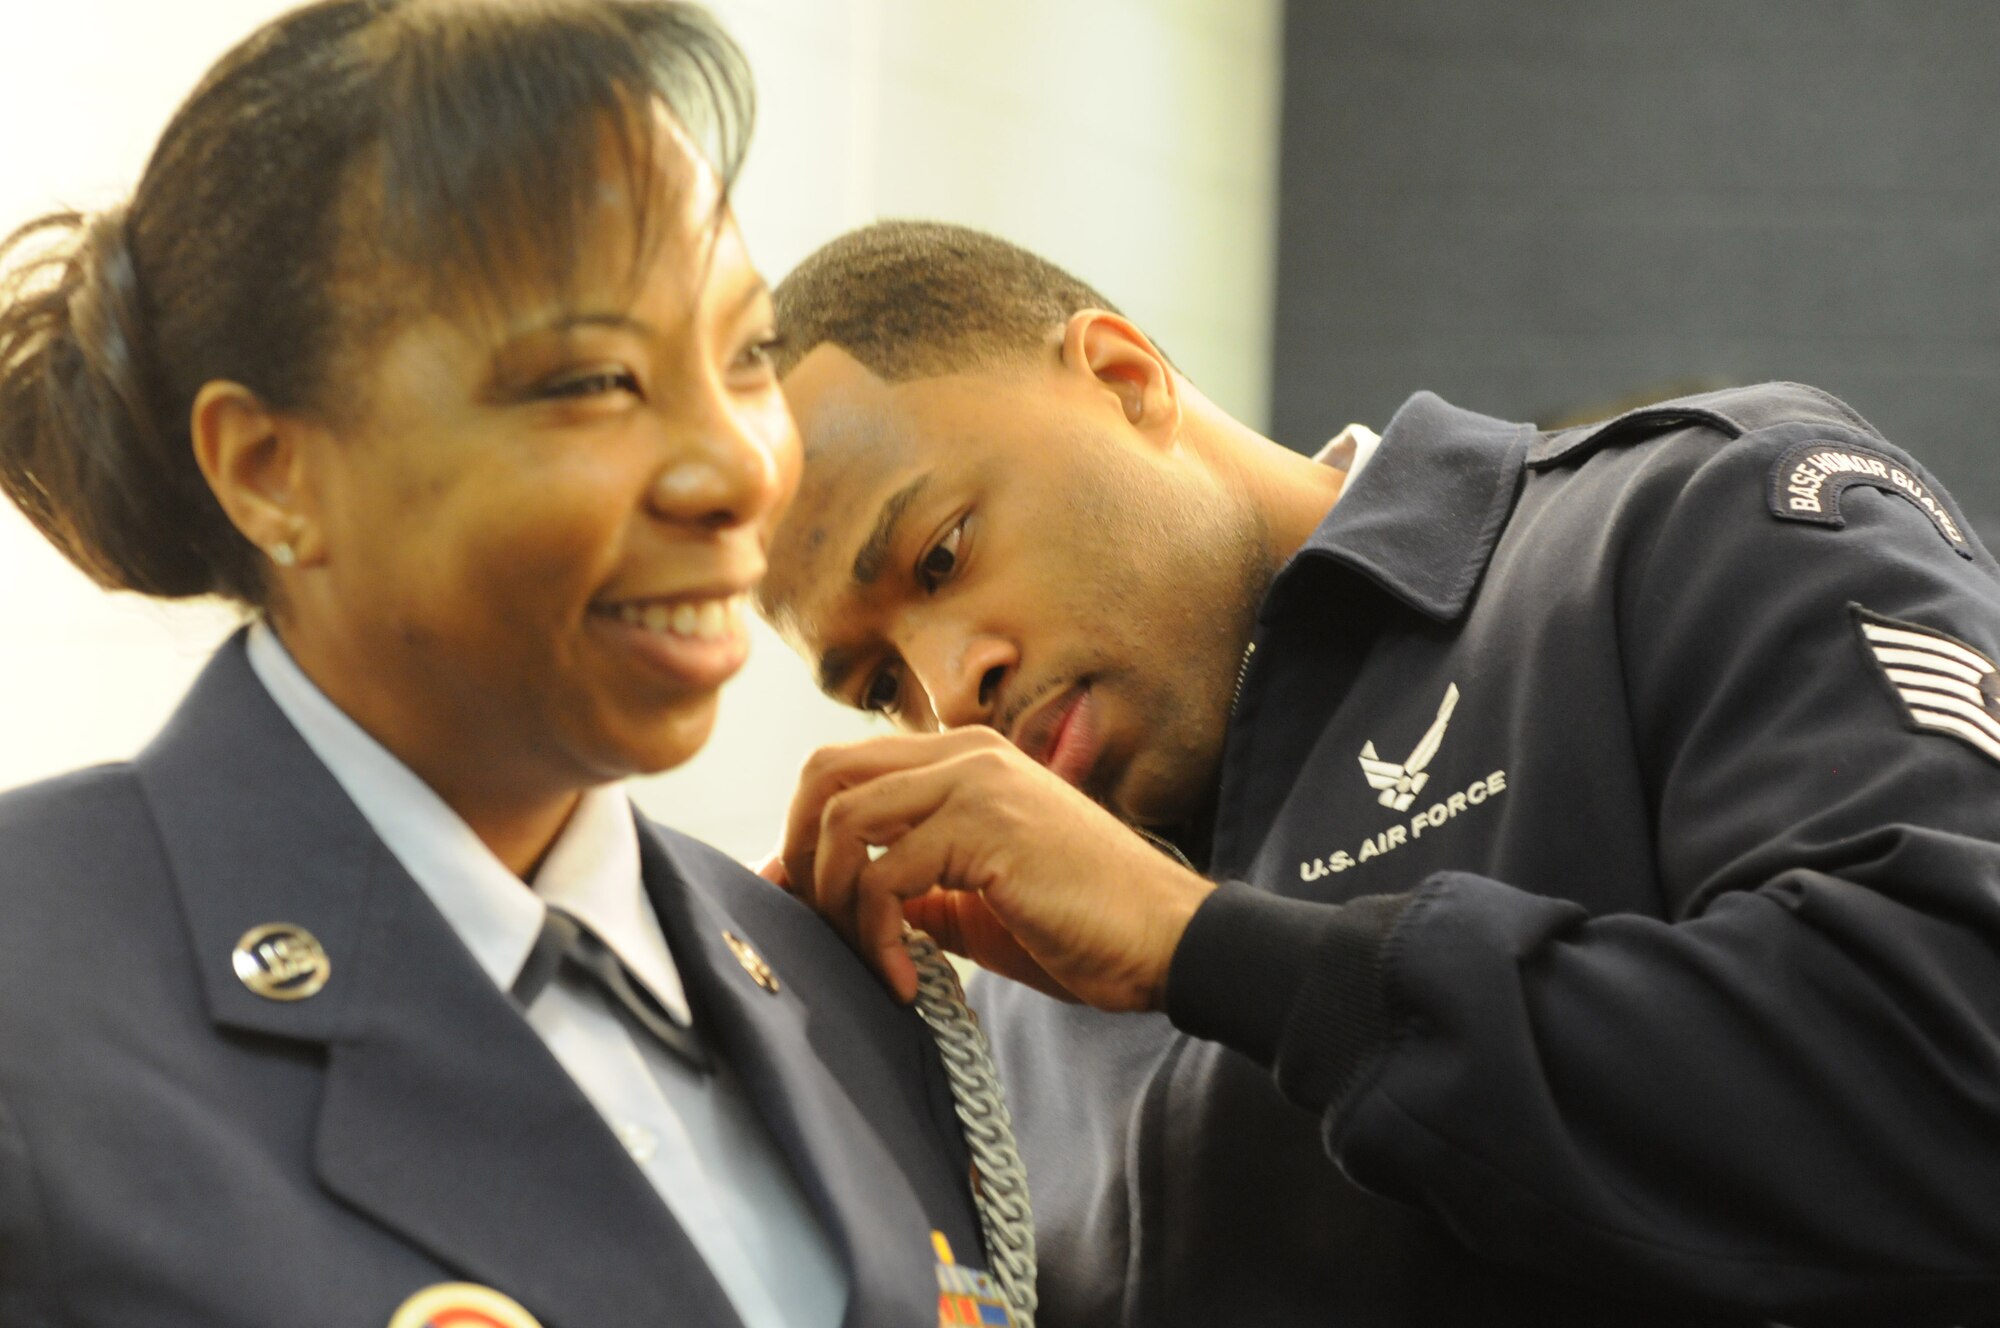 Tech. Sgt. Marcus Boykin helps Tech. Sgt. Jaqueline Constance with her Honor Guard uniform prior to presenting the colors during the Washington Wizards home game against the Golden State Warriors, Feb. 24. Both Boykin and Constance are D.C. Air National Guard participating in a community appreciation night honoring the DCANG.  (Air National Guard photo by Master Sgt. Craig Clapper)